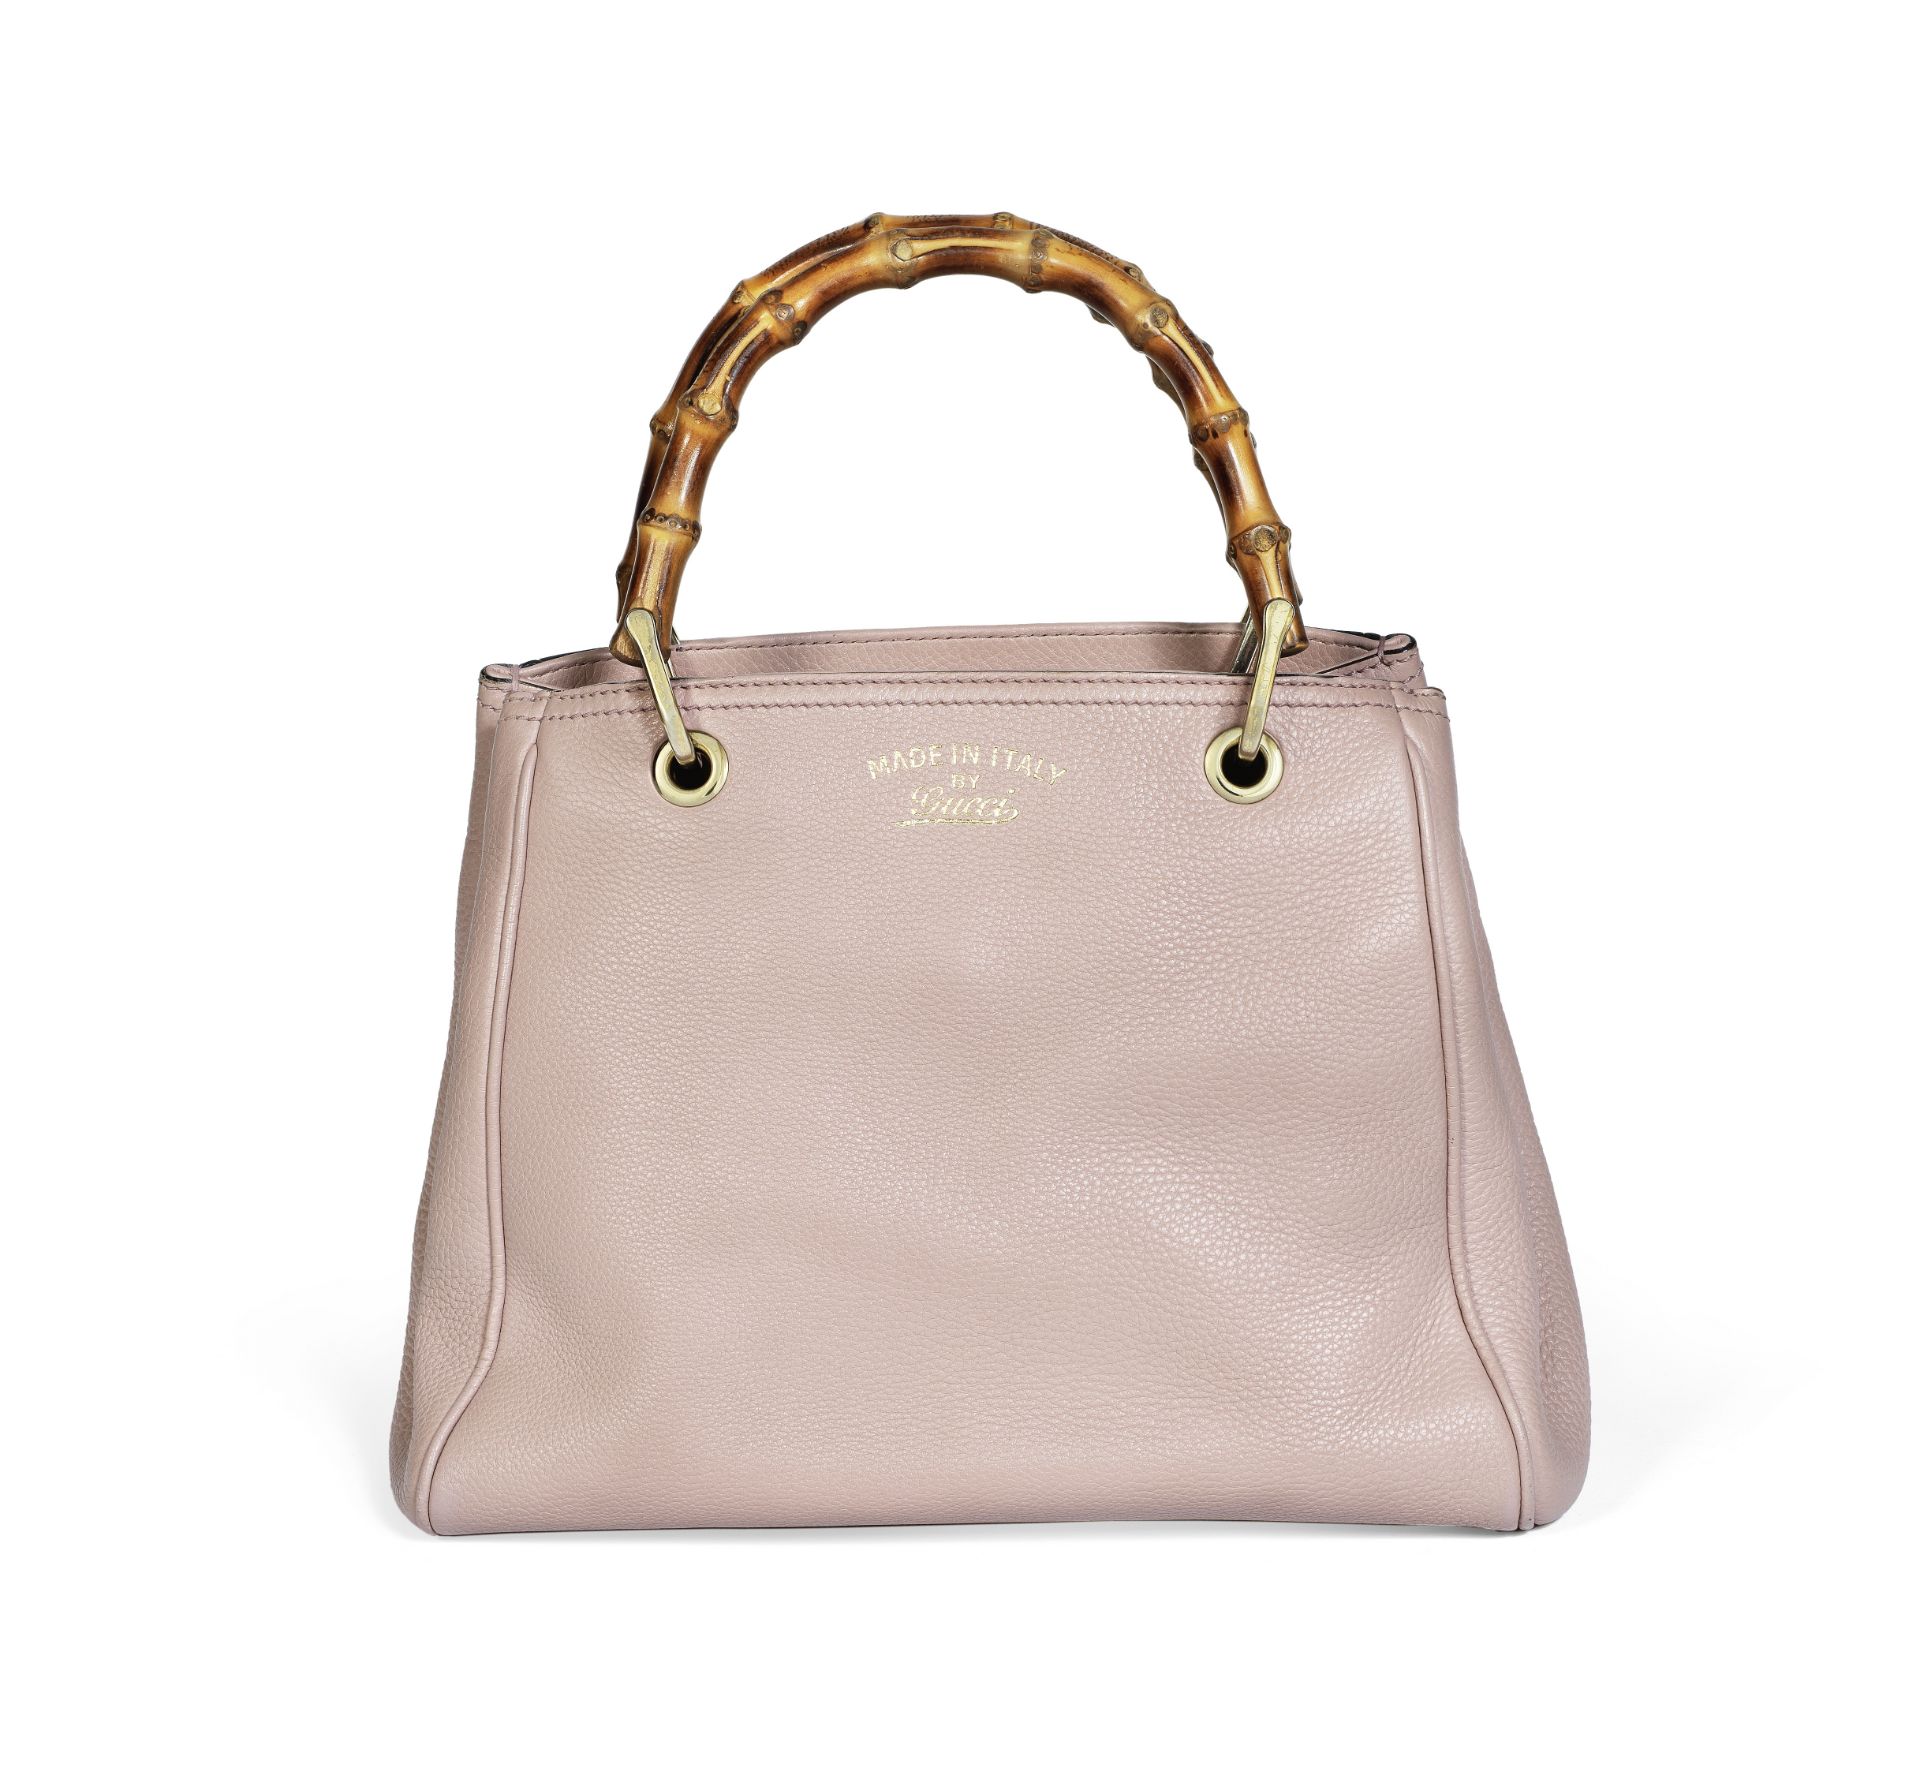 Dusky Pink Leather Small Shopping Bamboo Tote, Gucci, (Includes detachable shoulder strap)